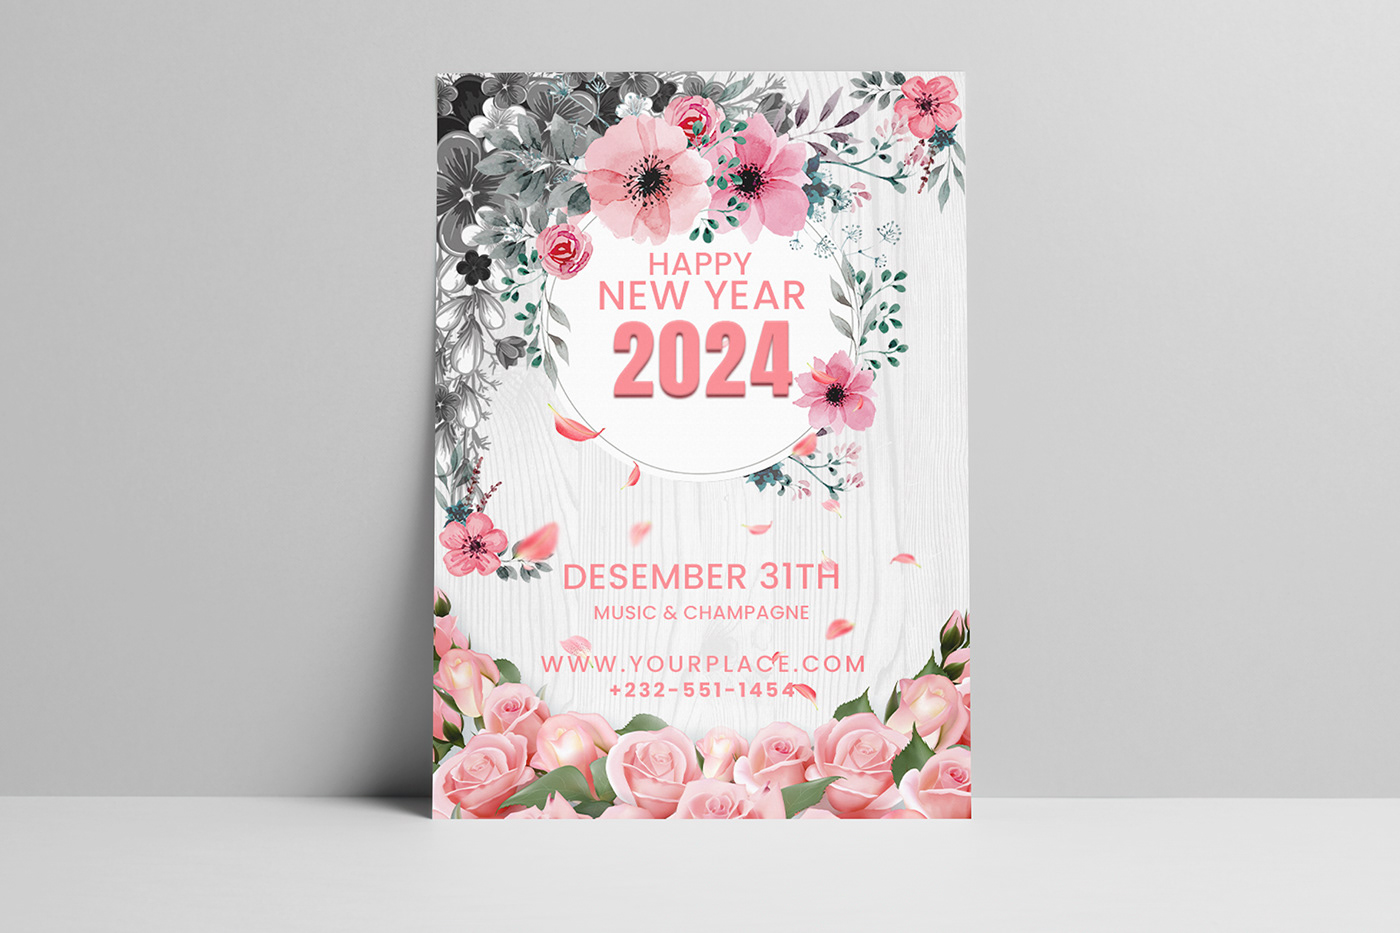 New Year Card happy new year new year 2024 Flyer Design new years eve year party christmas flyer new year new year flyer New Year poster